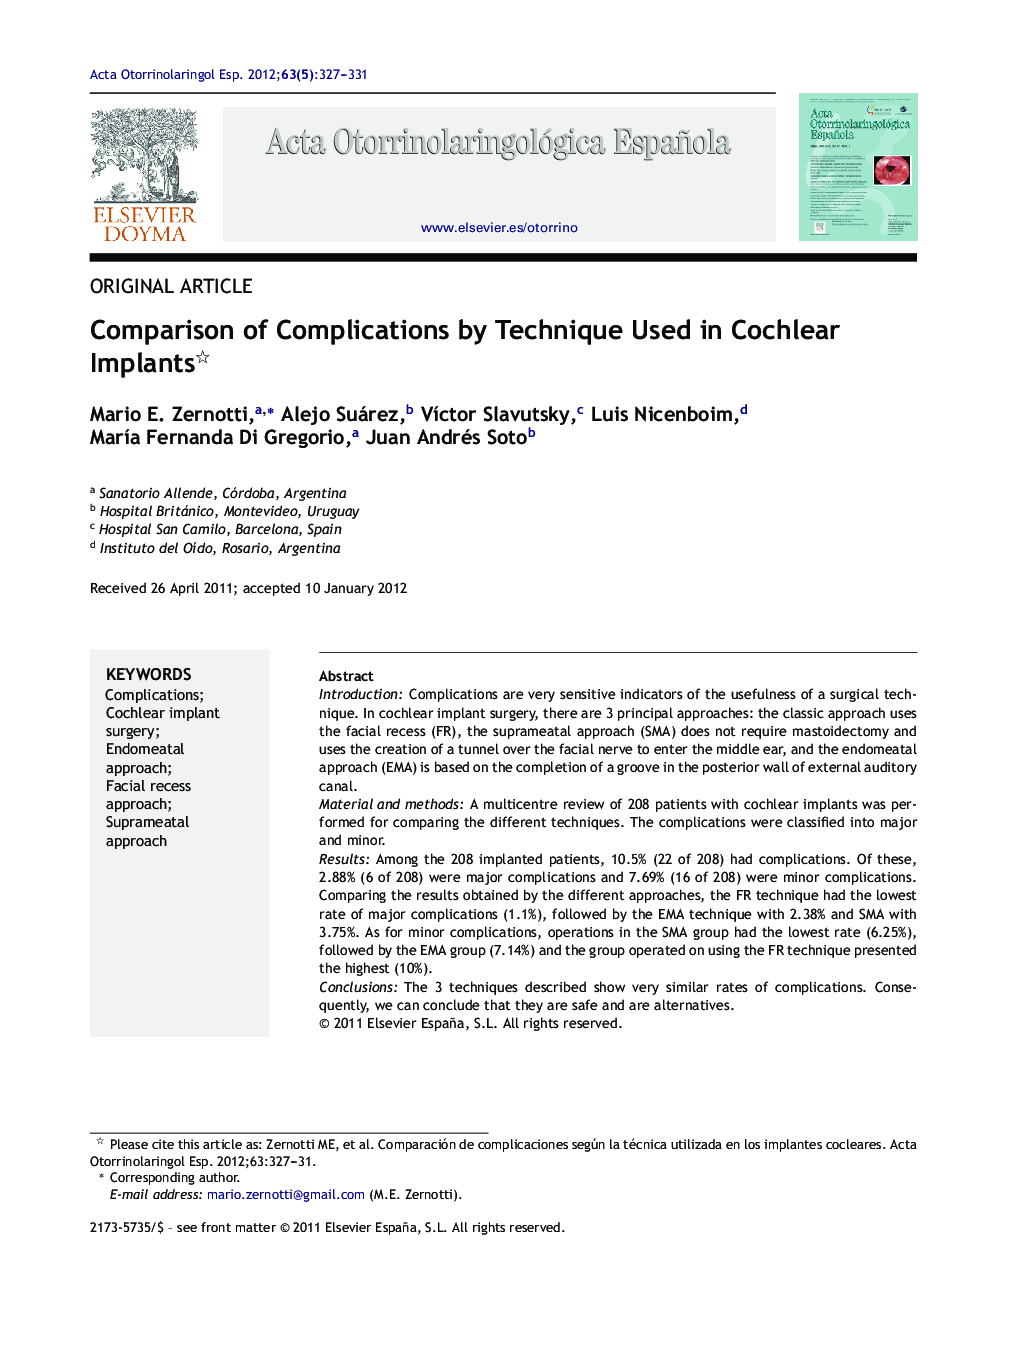 Comparison of Complications by Technique Used in Cochlear Implants 